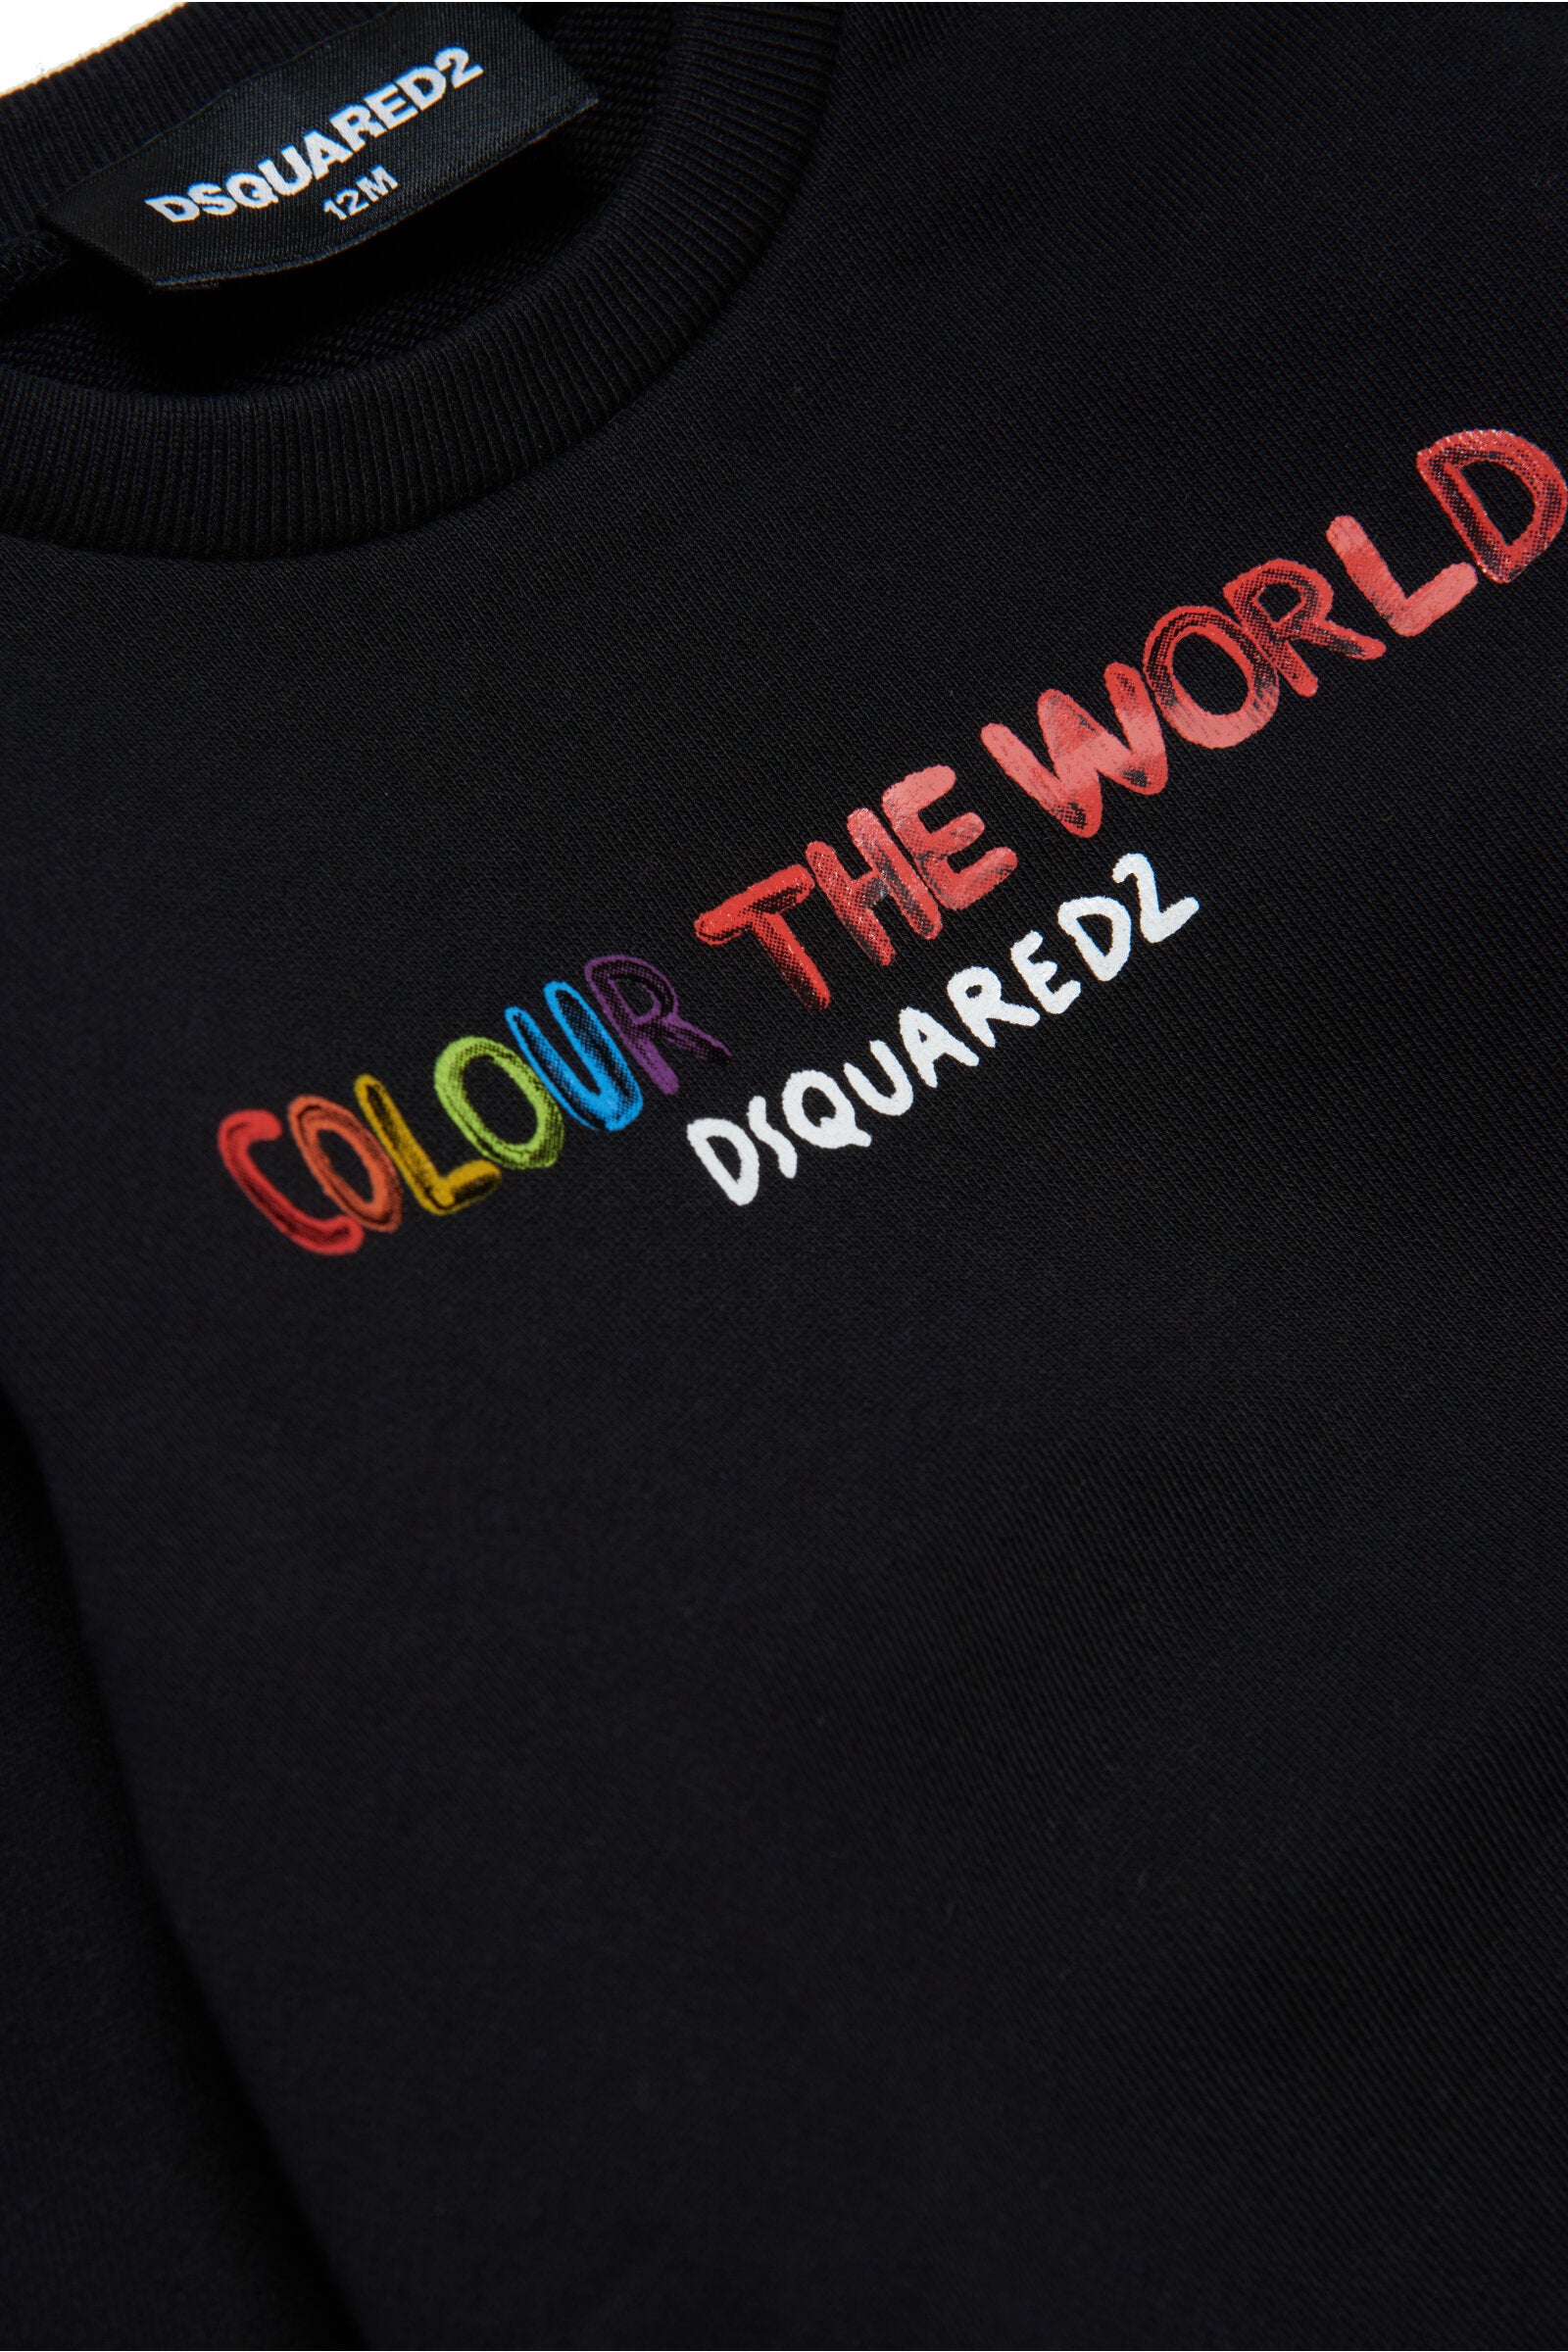 Cotton crew-neck sweatshirt with Colour the World lettering